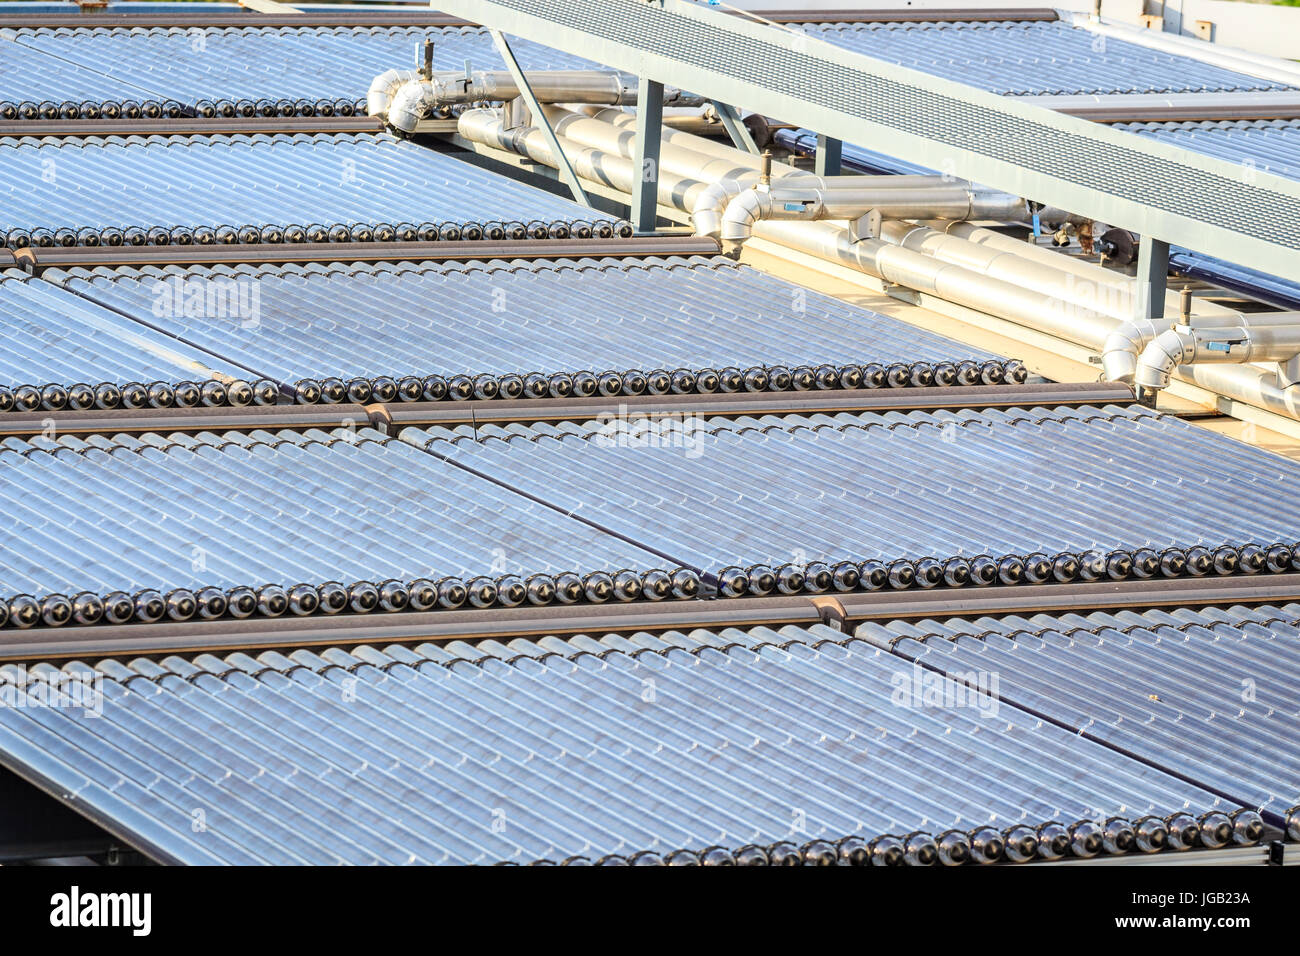 Water solar panels installed on flat roof Stock Photo